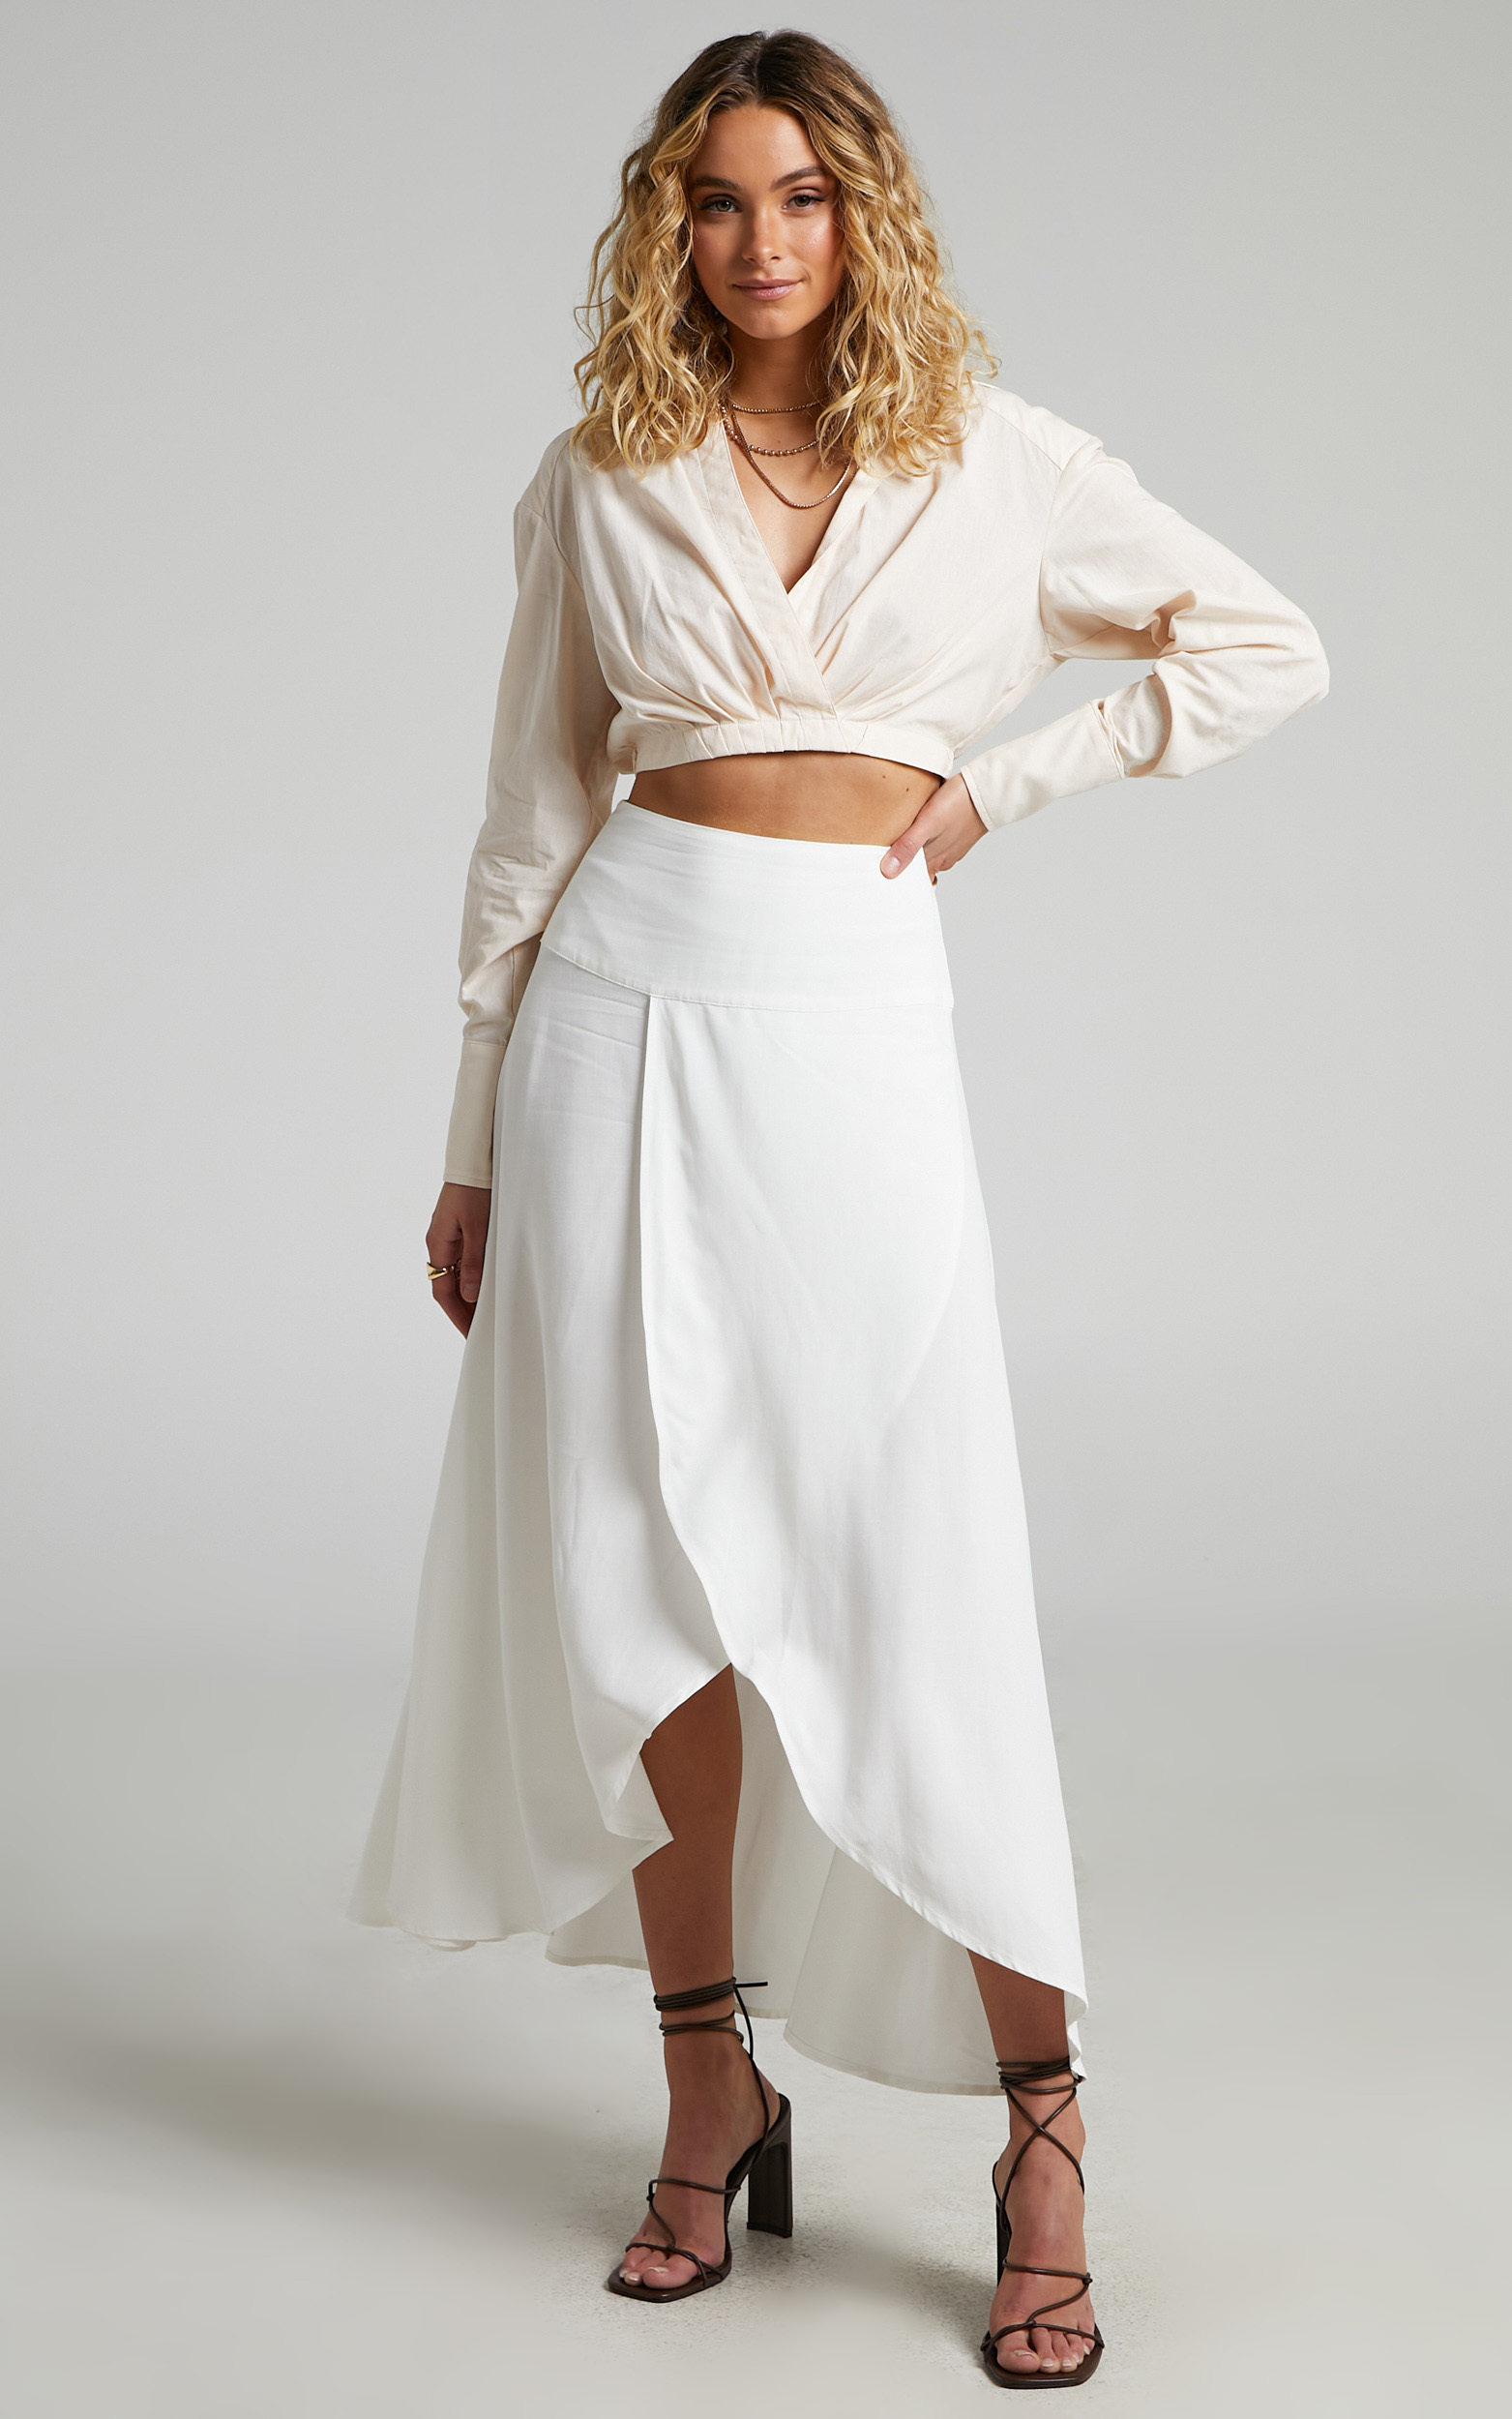 Andee Fixed Wrap Midi Skirt in White - 06, WHT1, hi-res image number null